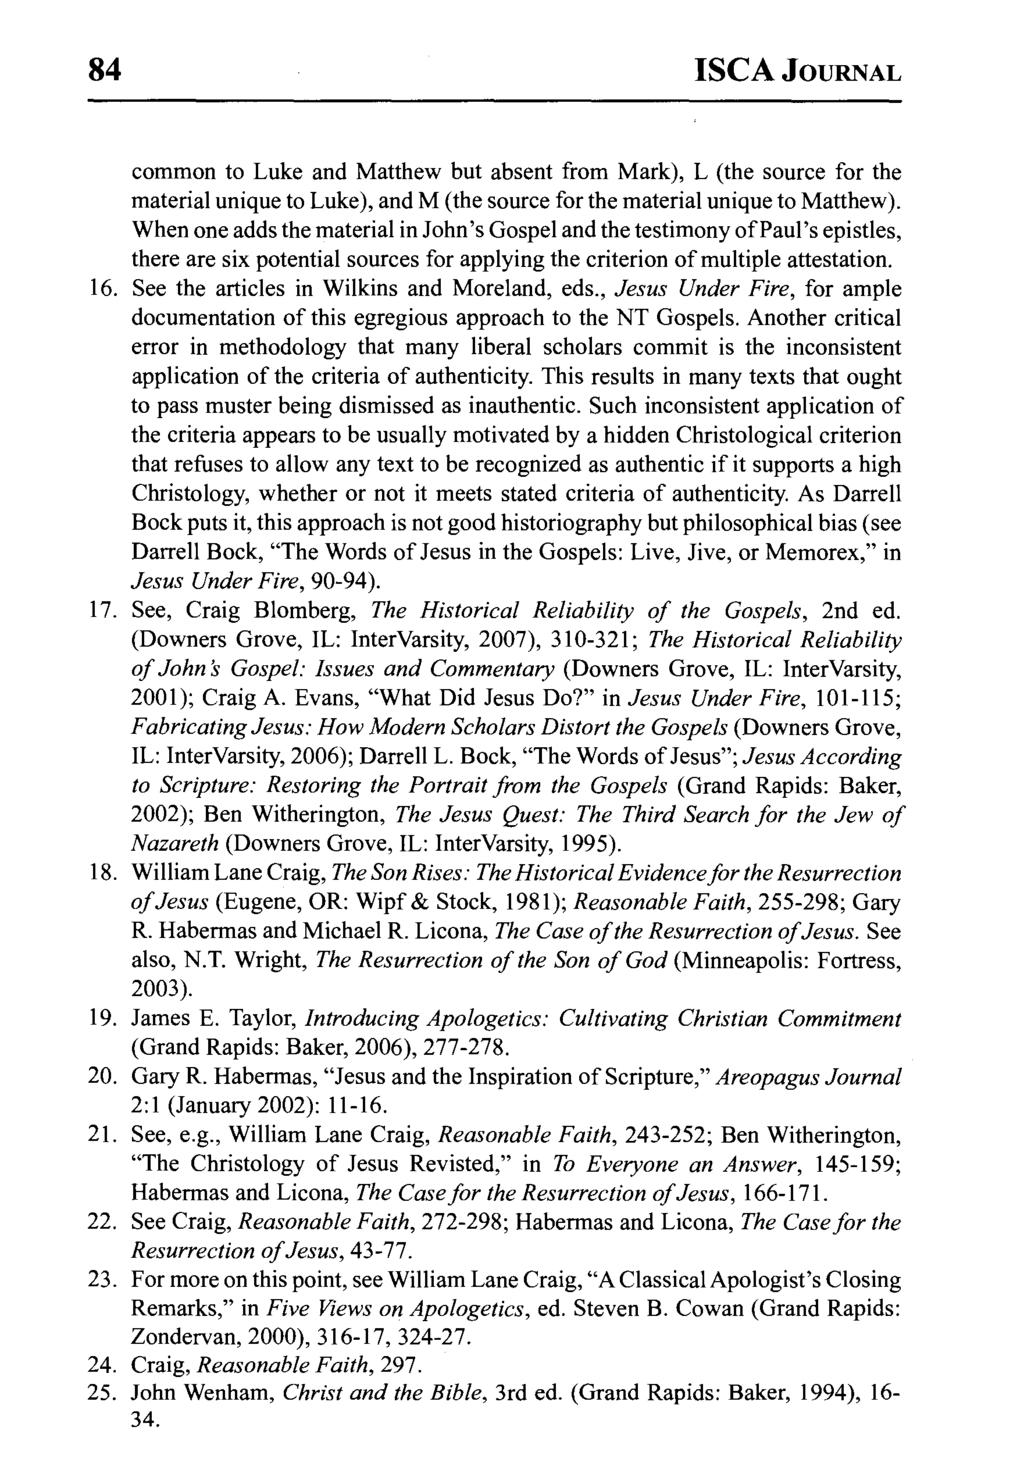 84 ISCA JOURNAL common to Luke and Matthew but absent from Mark), L (the source for the material unique to Luke), and M (the source for the material unique to Matthew).